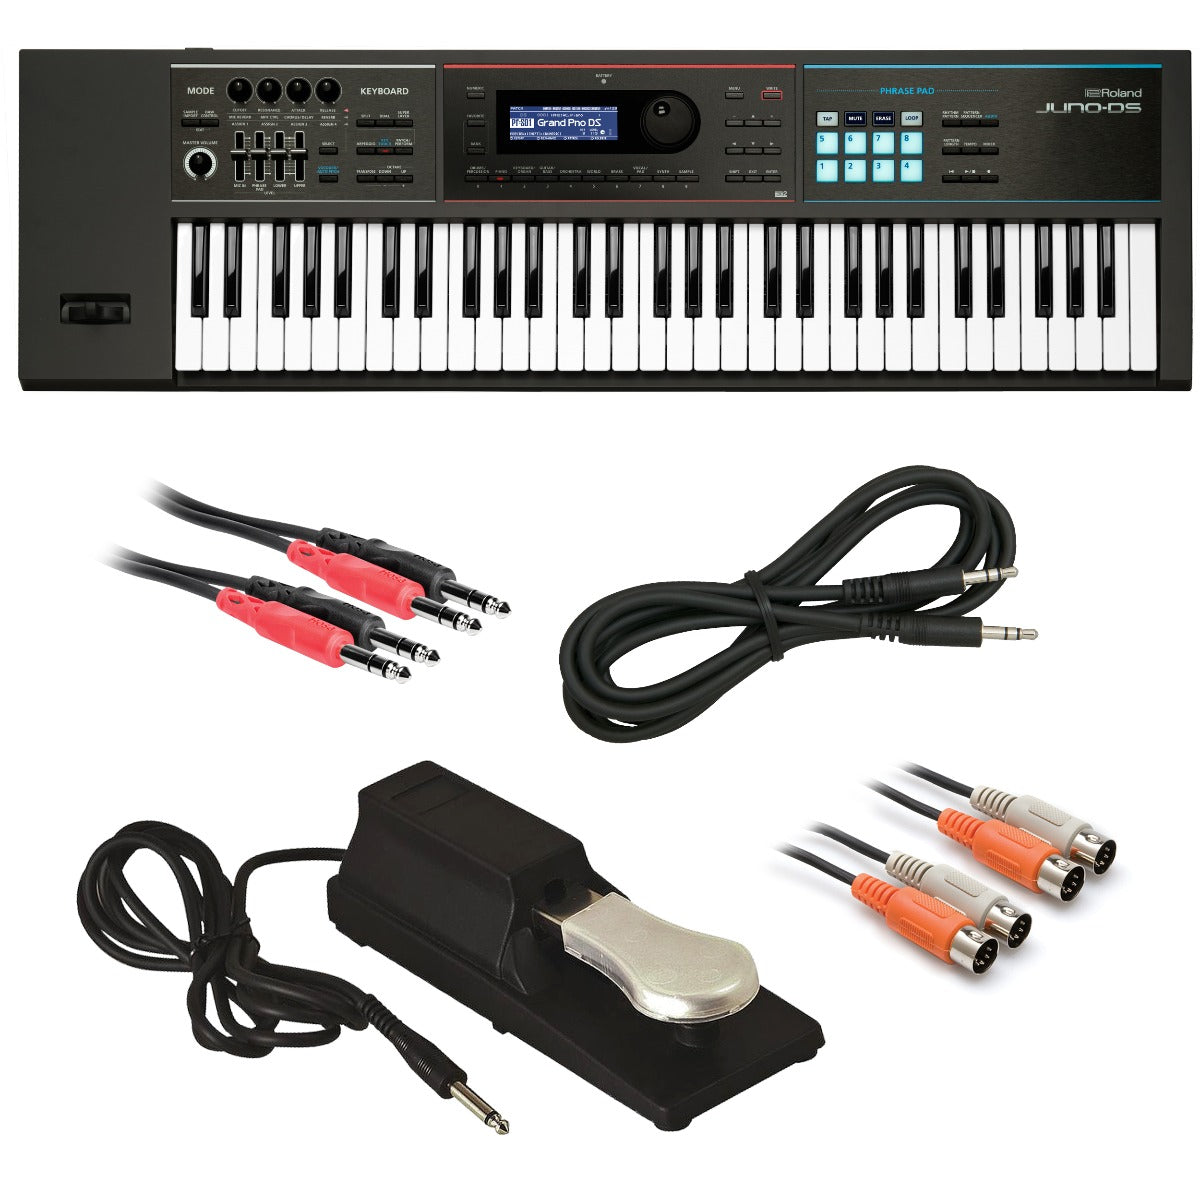 Kentek 3 Feet FT USB DATA PC Cable Cord For ROLAND JUNO-G JUNO-GI JUNO-STAGE  Keyboard Beige 